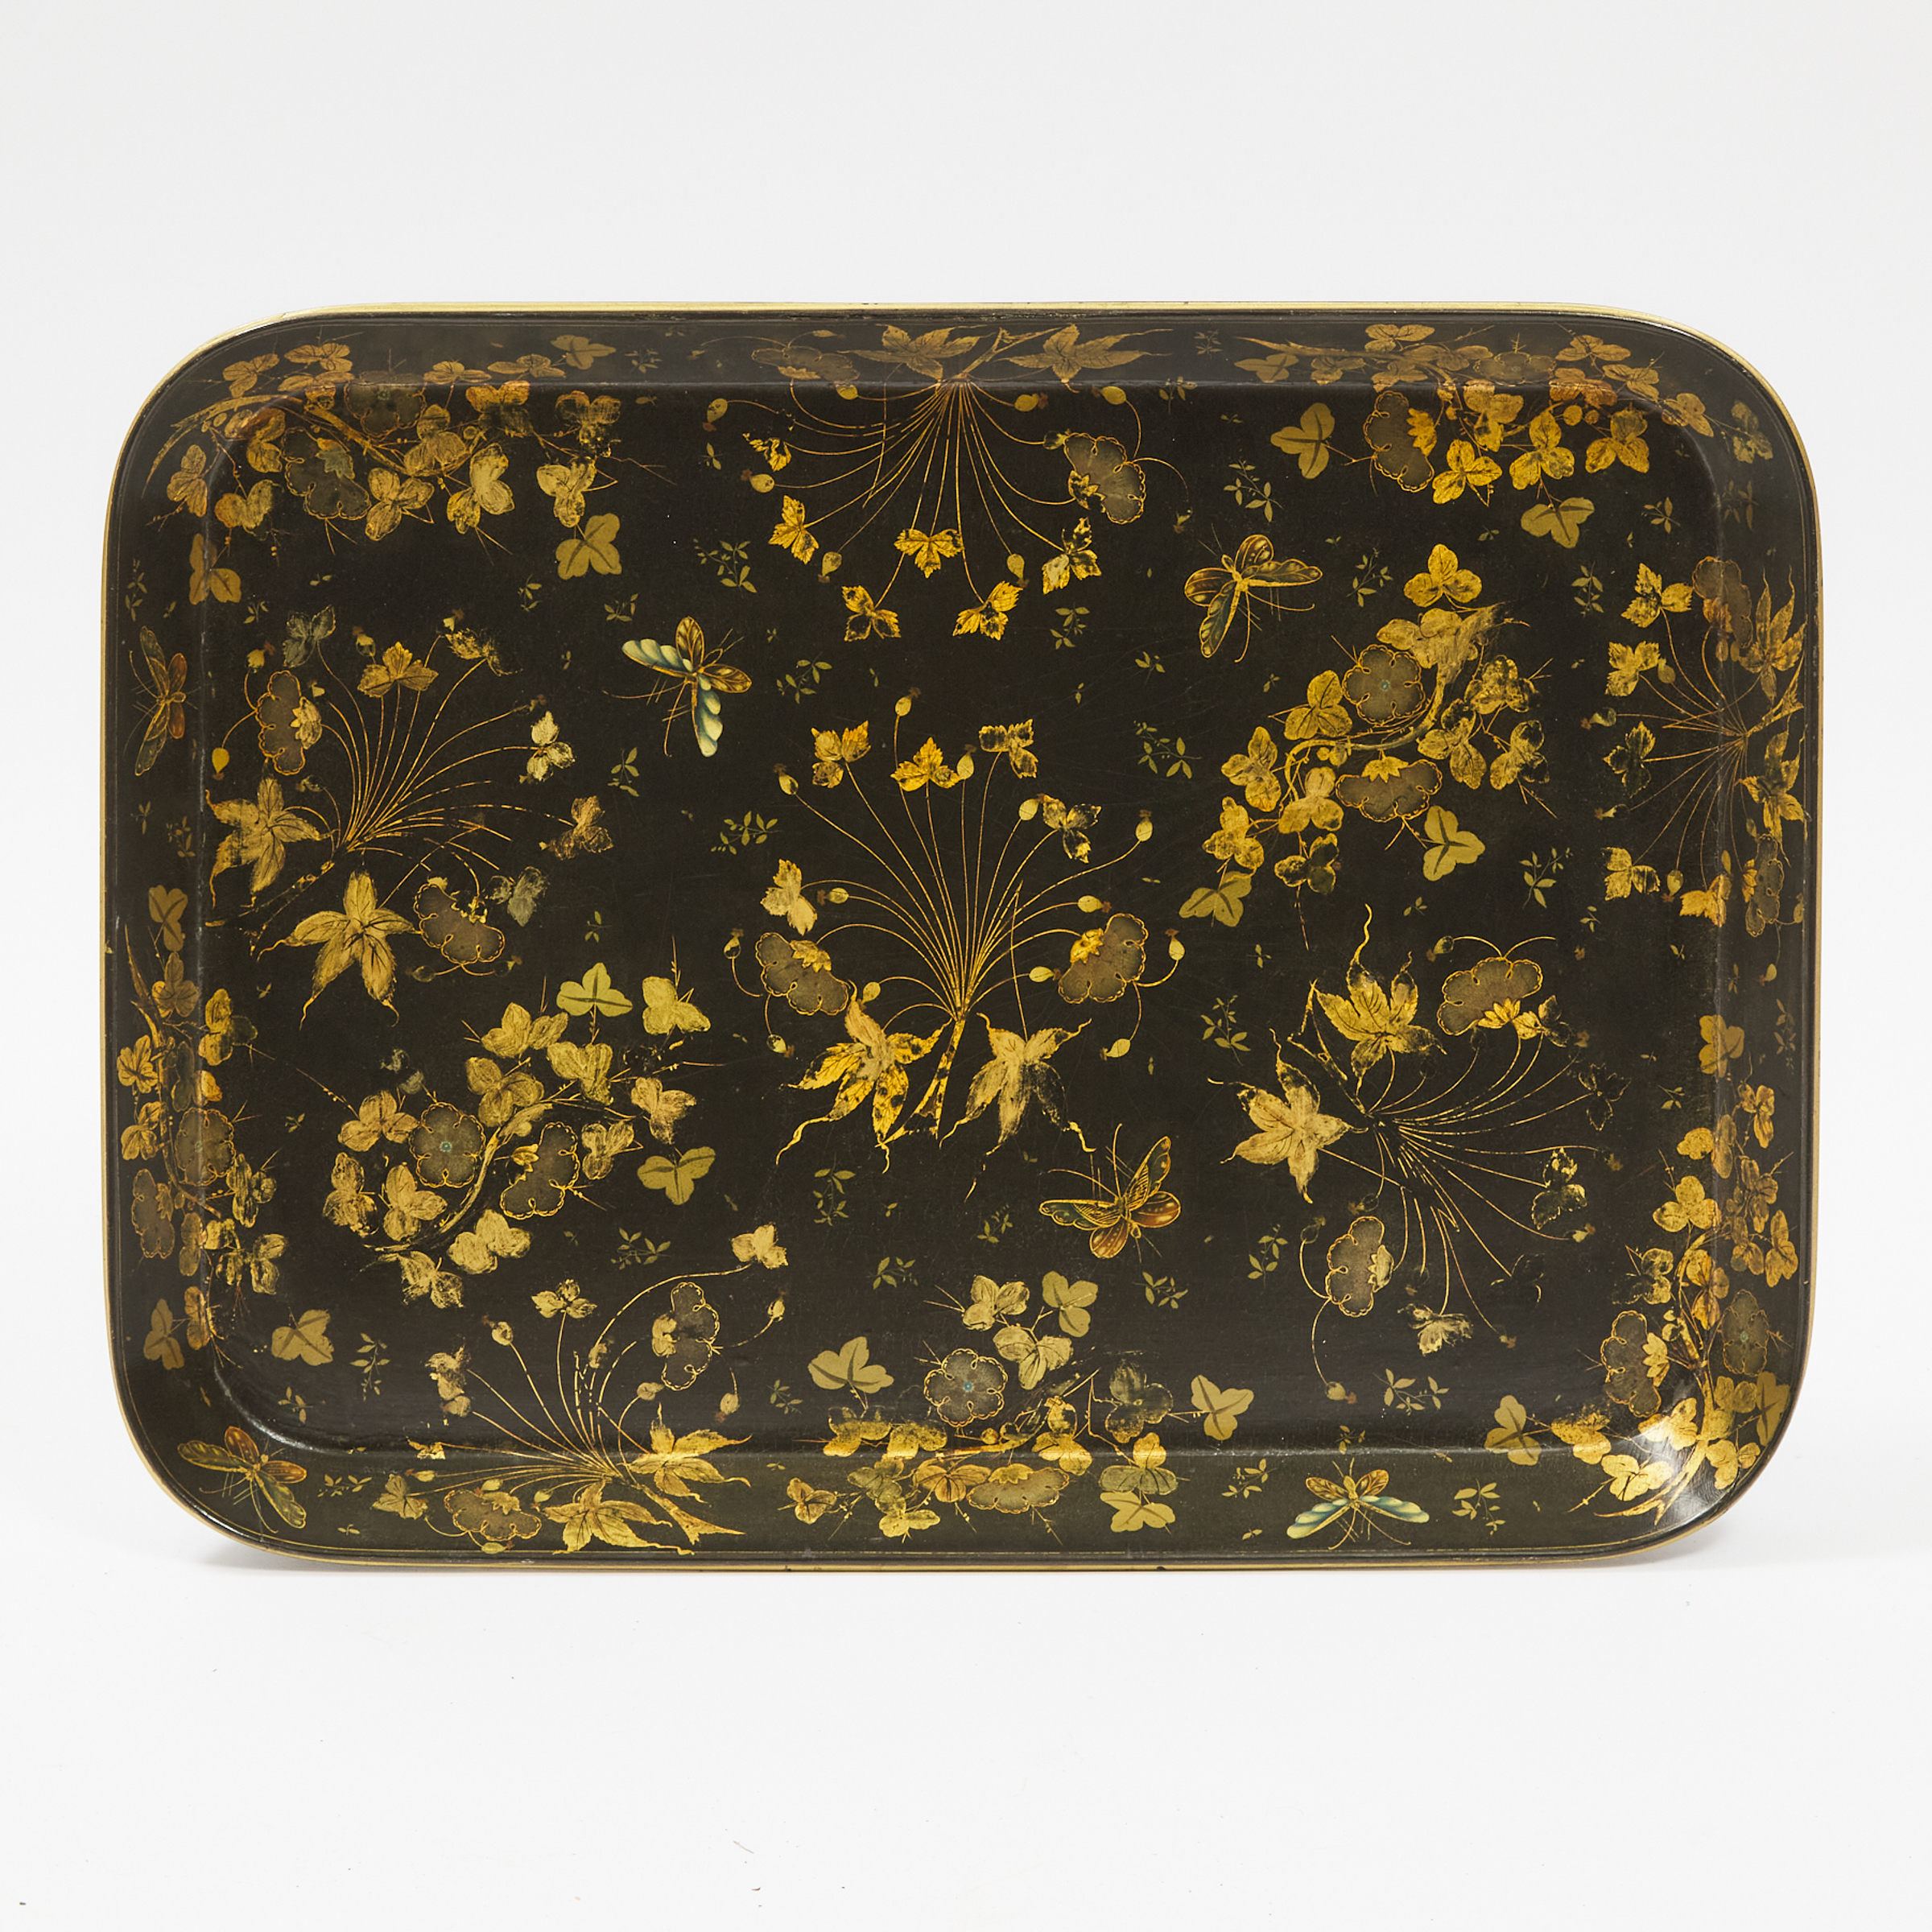 Regency Gilt Decorated Black Lacquer Tea Tray, Clay, King St., Covent Garden